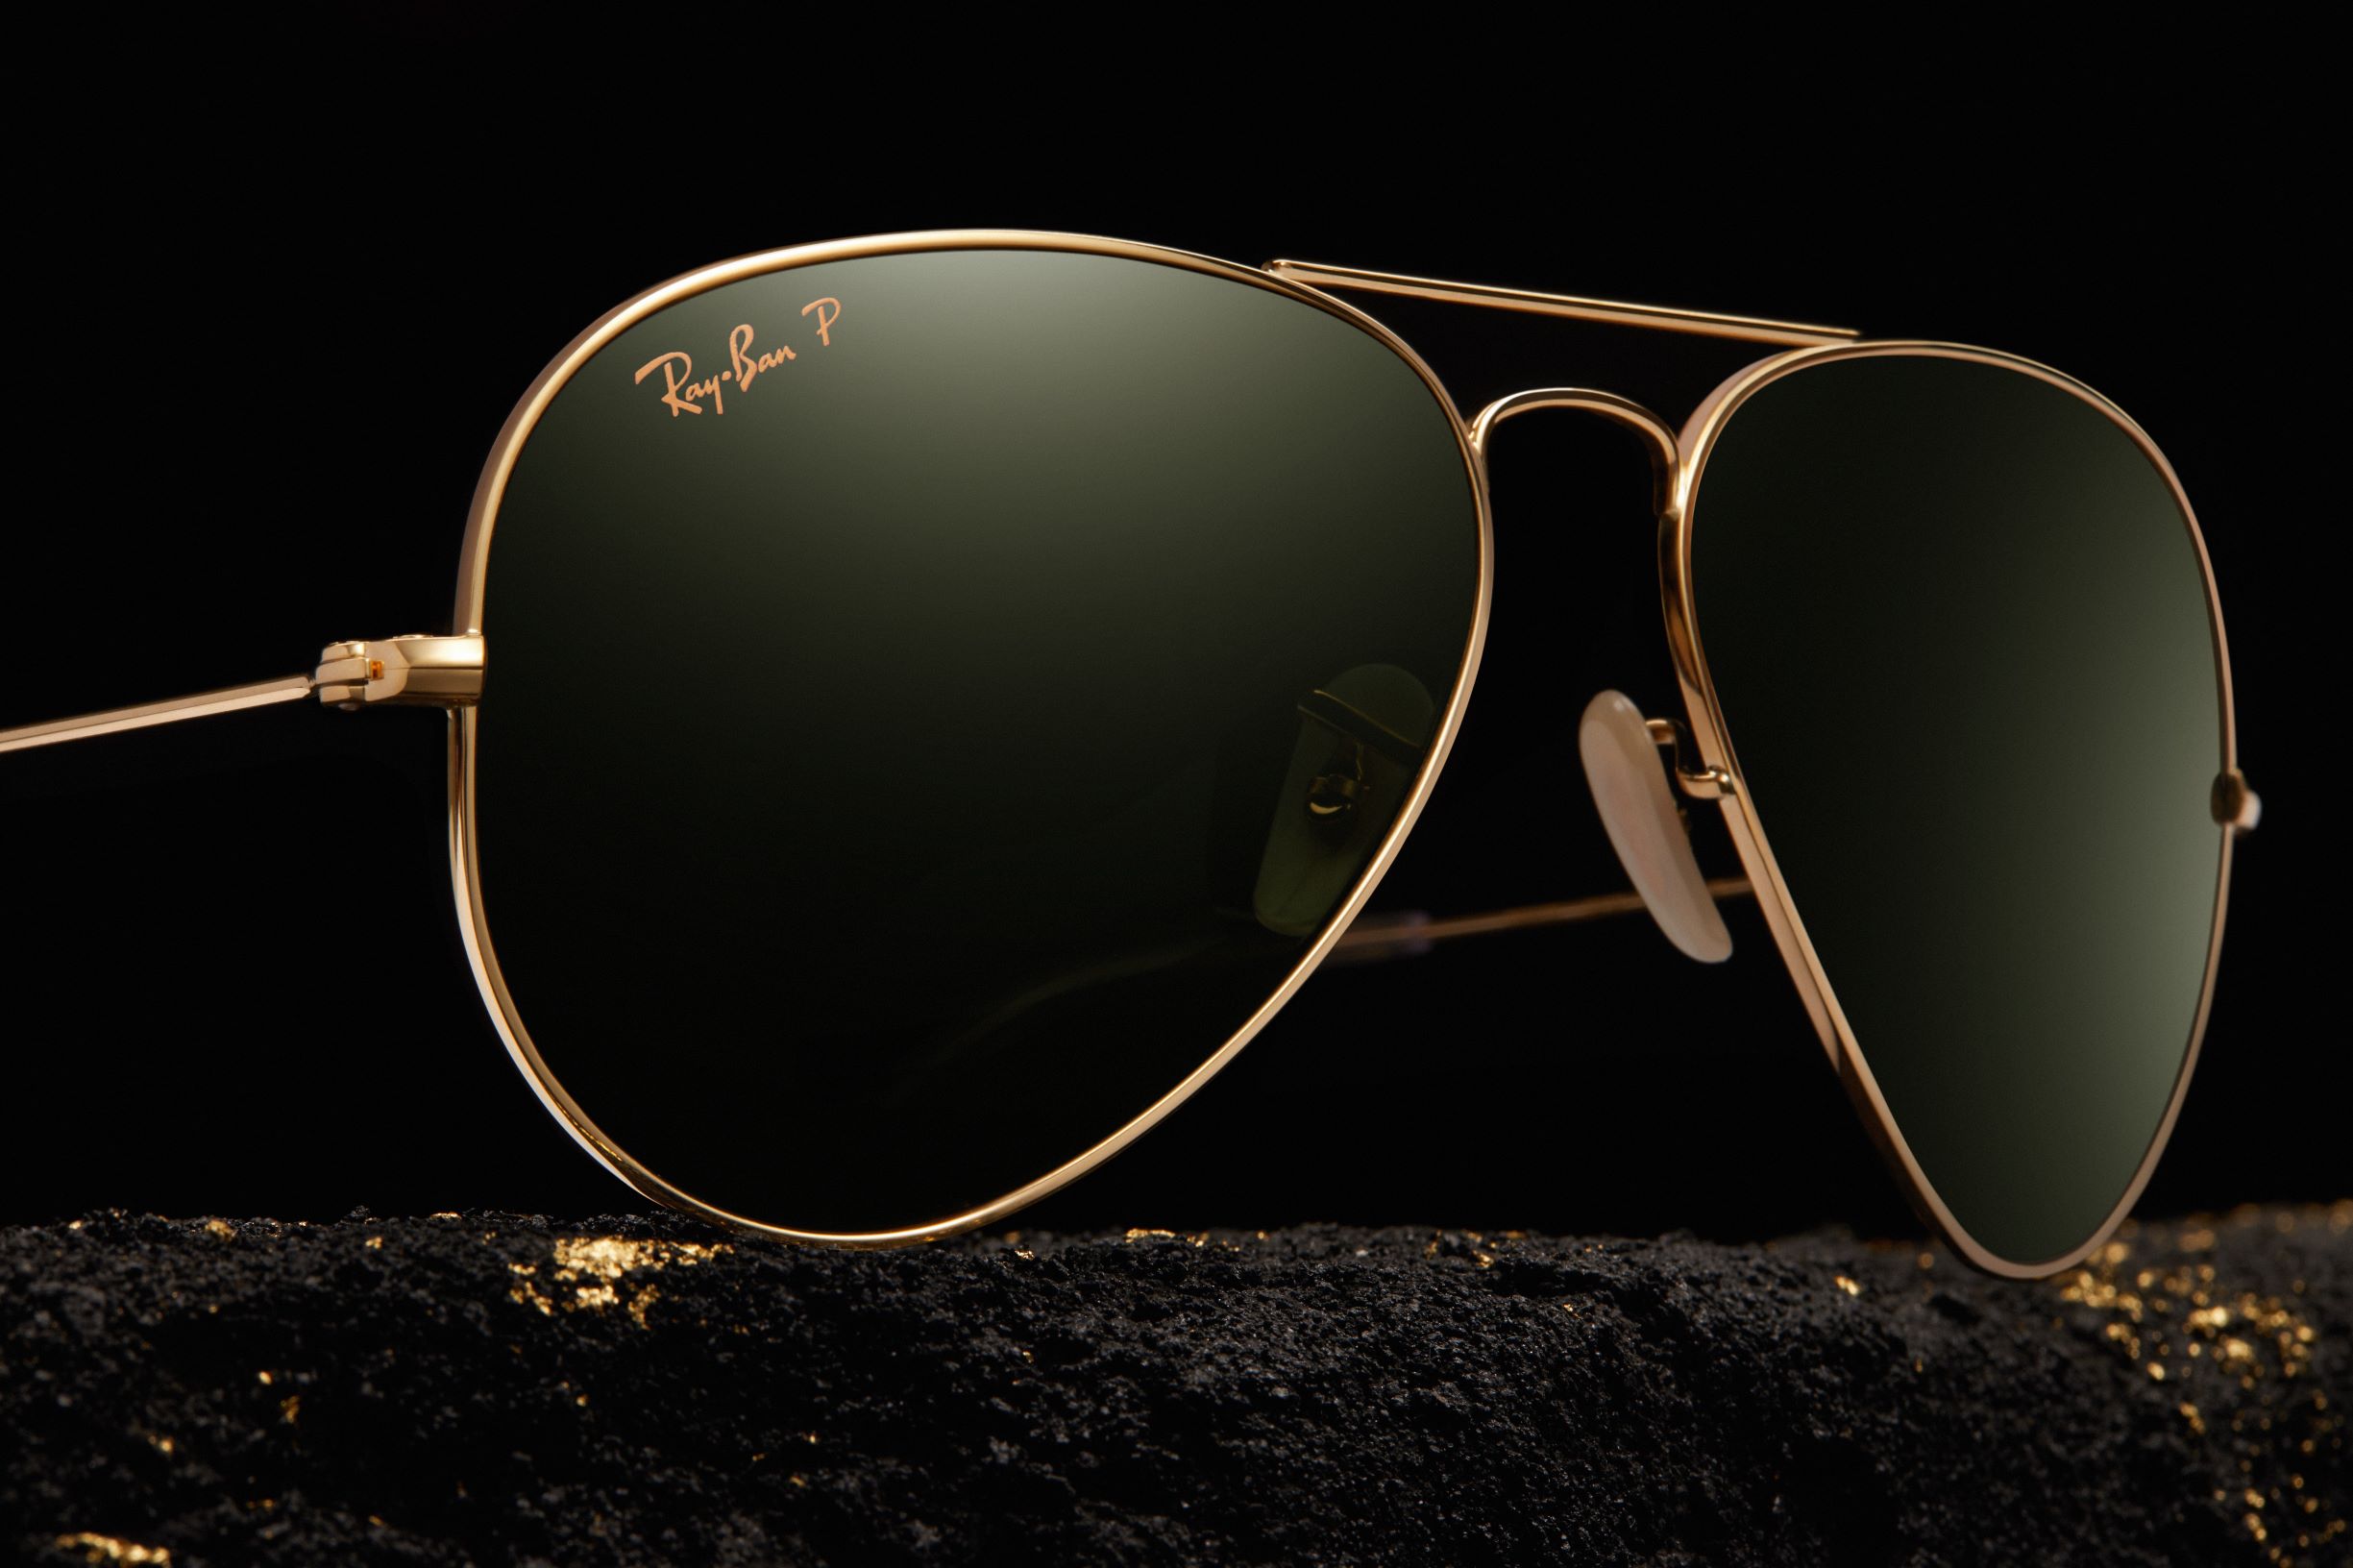 Ray Ban S Iconic Aviator Sunglasses Are Now Available With Solid Gold